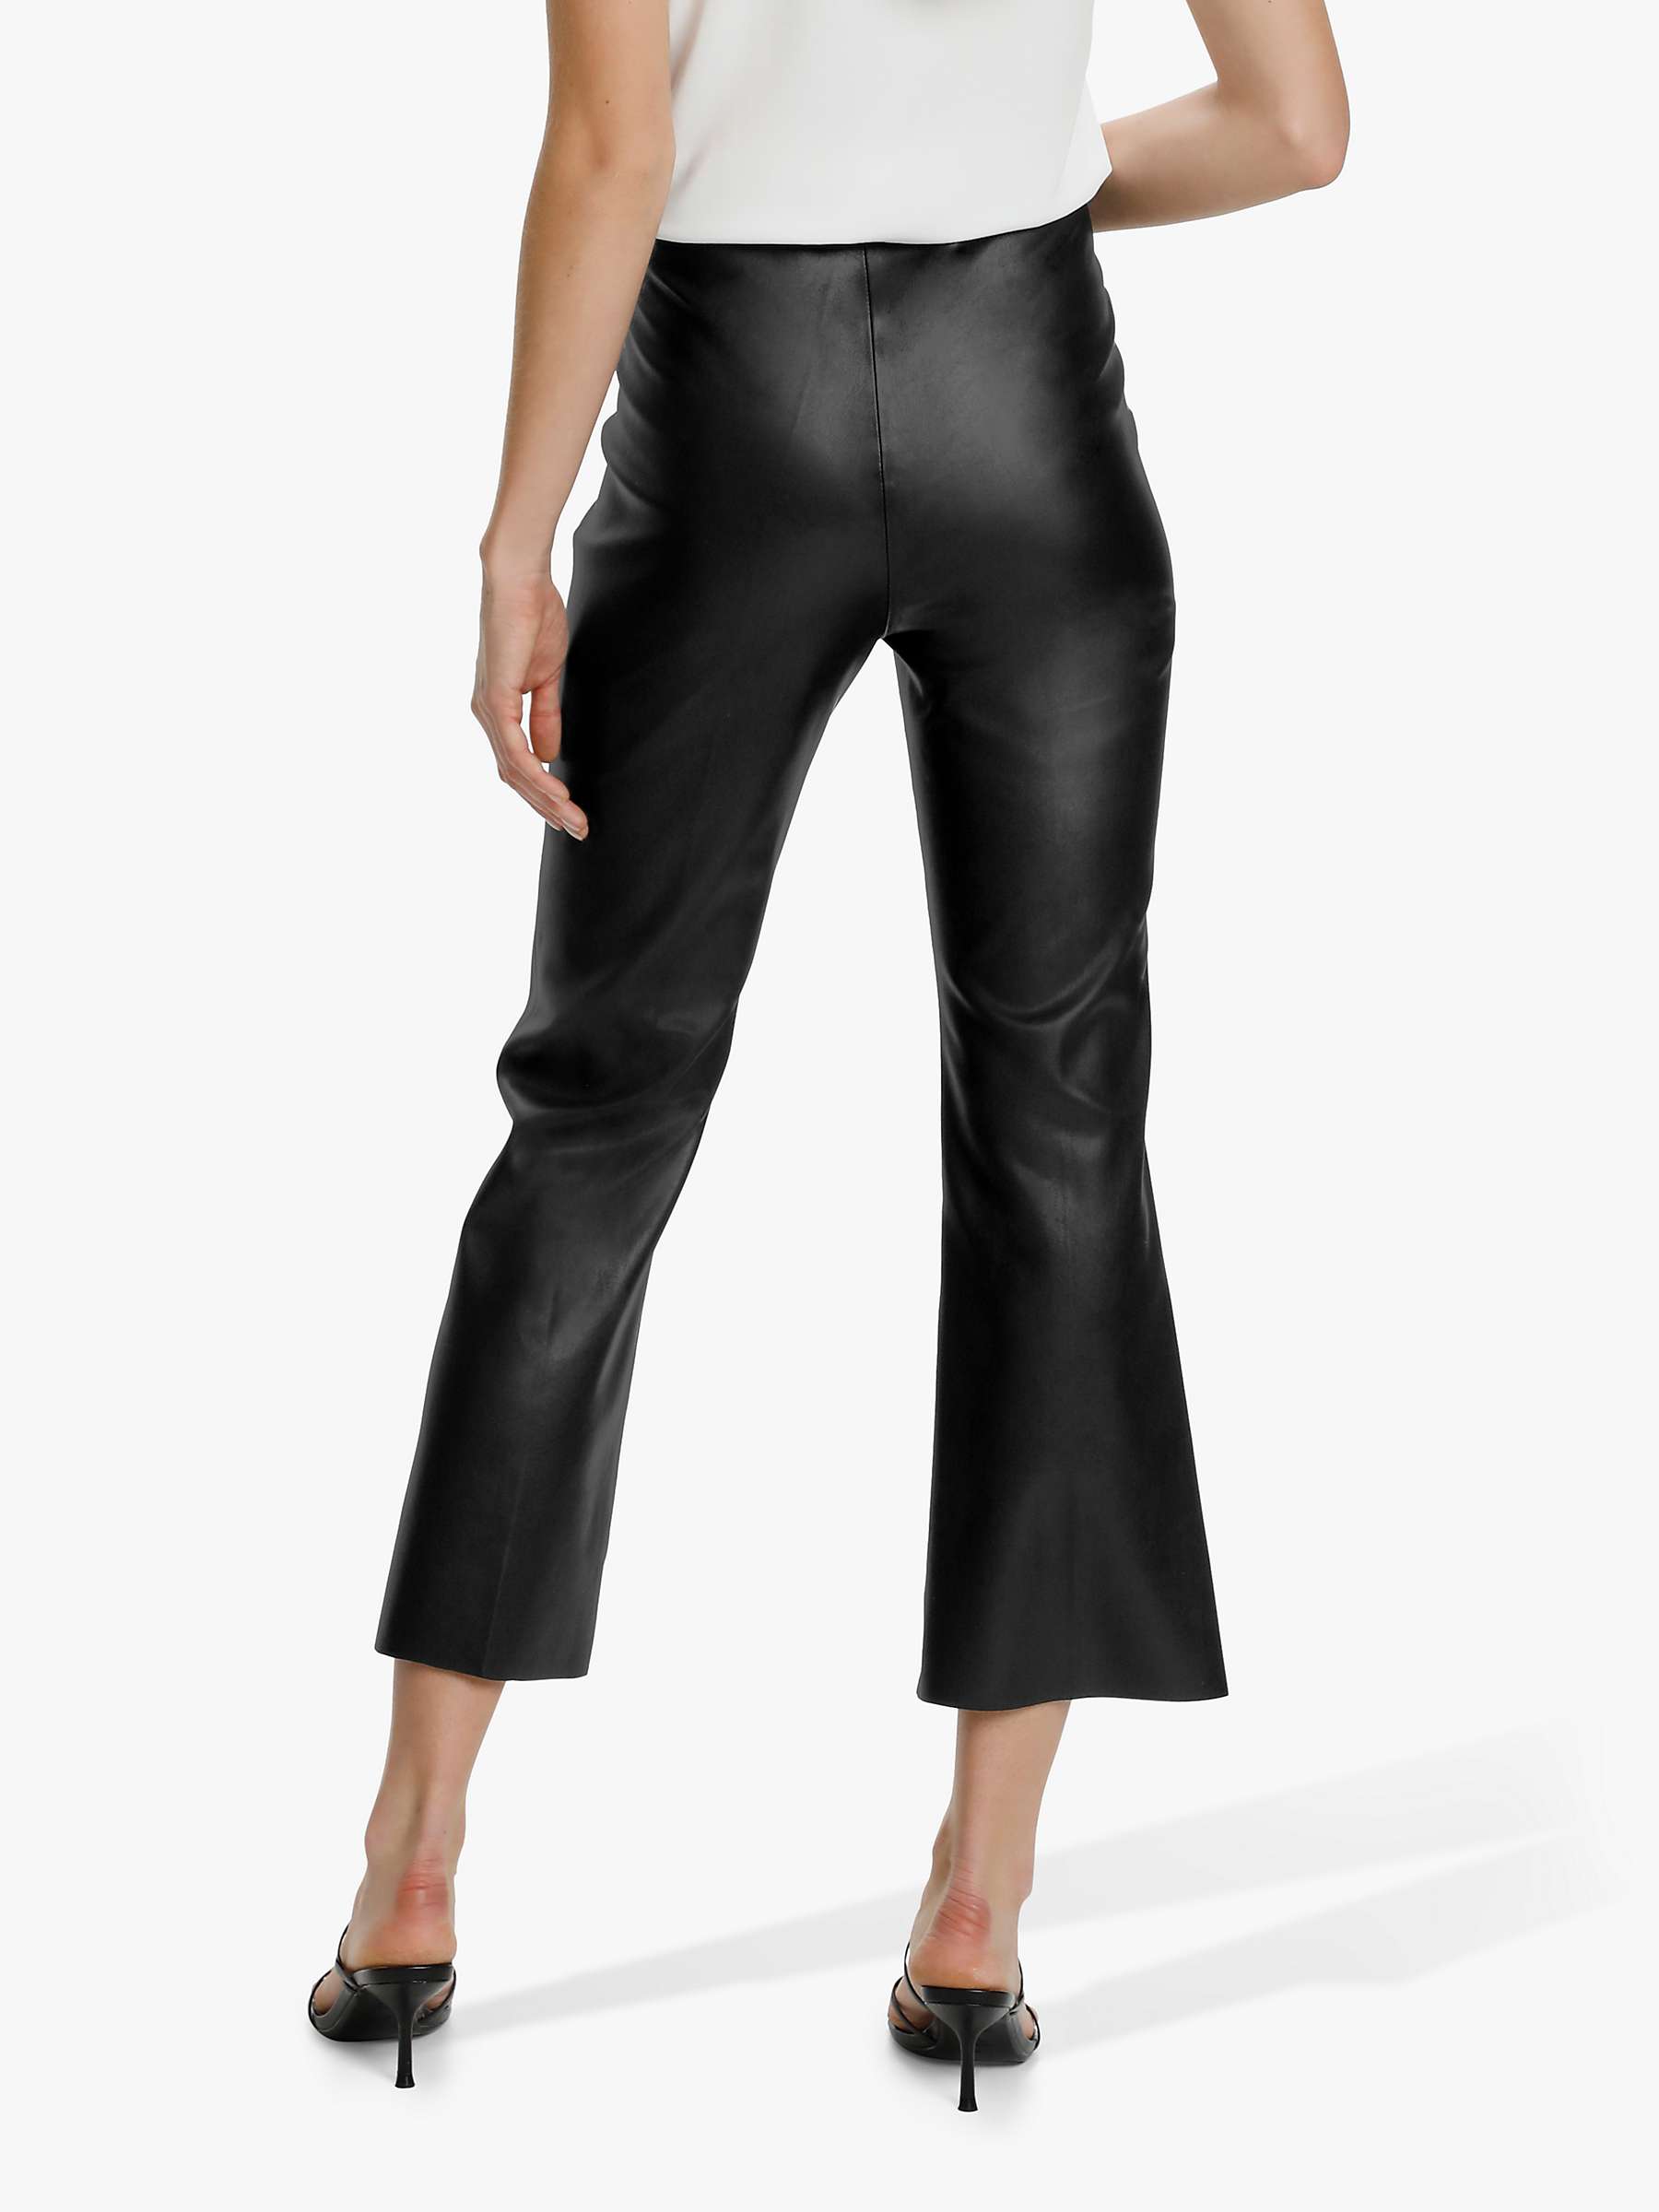 Soaked In Luxury Kaylee Faux Leather Kick Flare Trousers, Black at